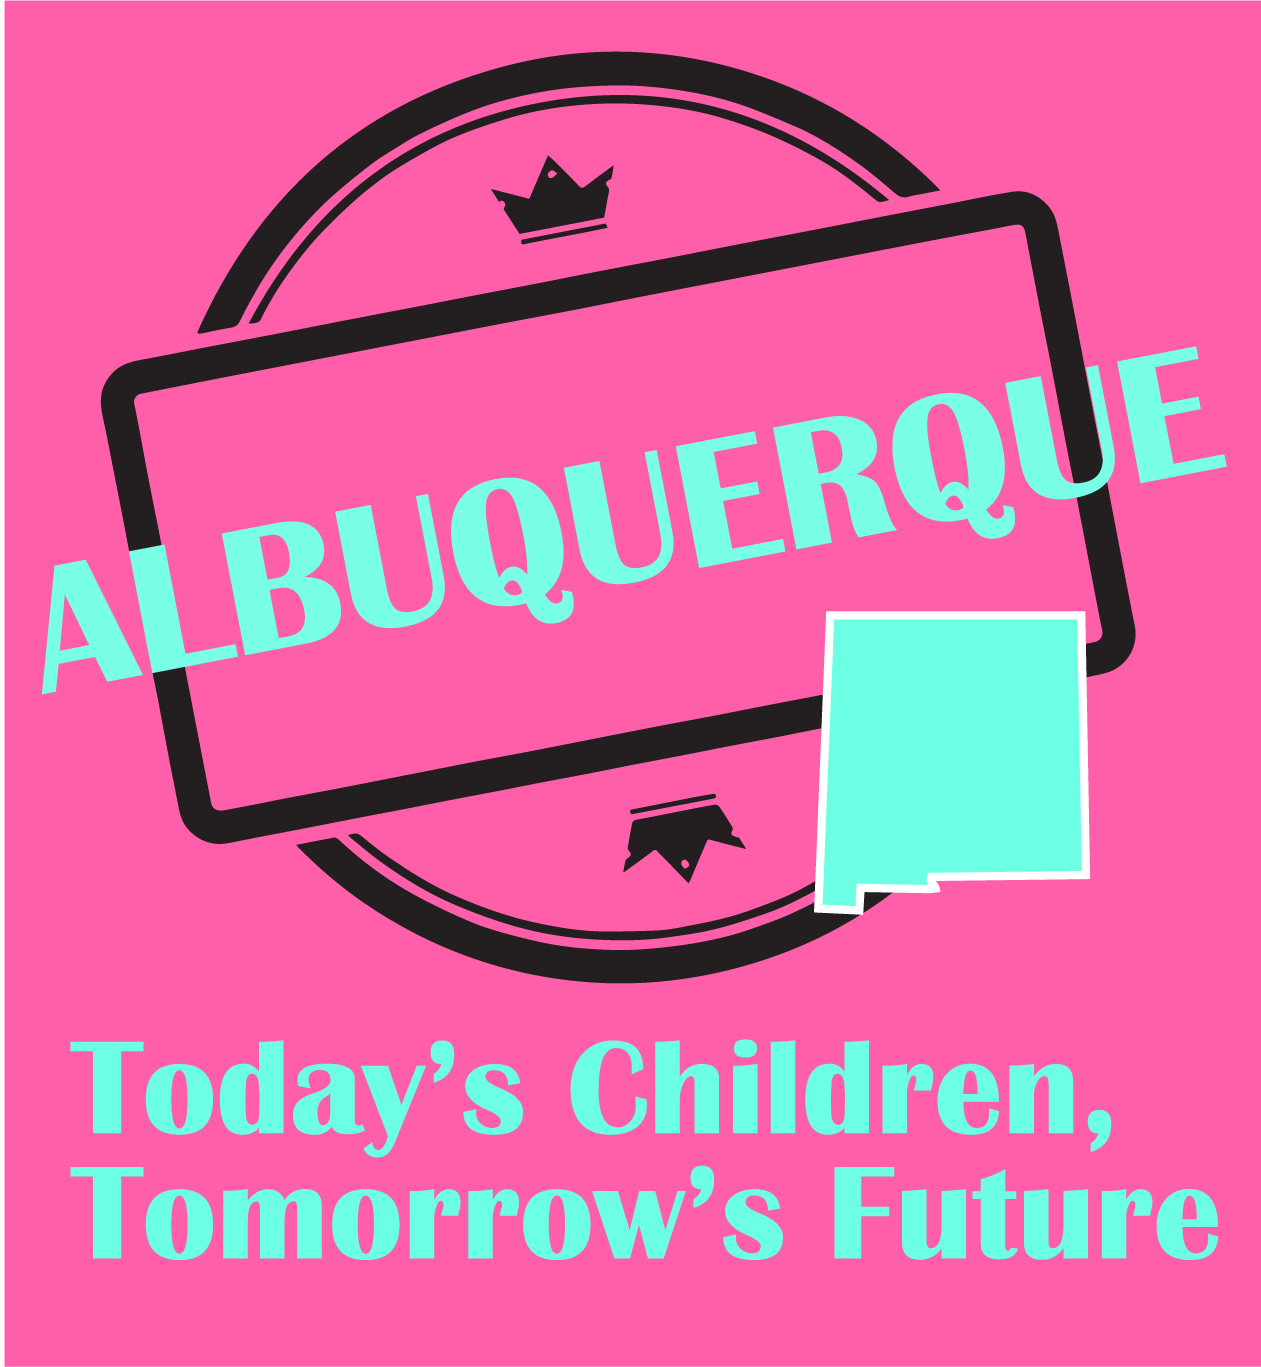 Image for Smiles, Joy, Laughter, and Fun Days for Children - Albuquerque